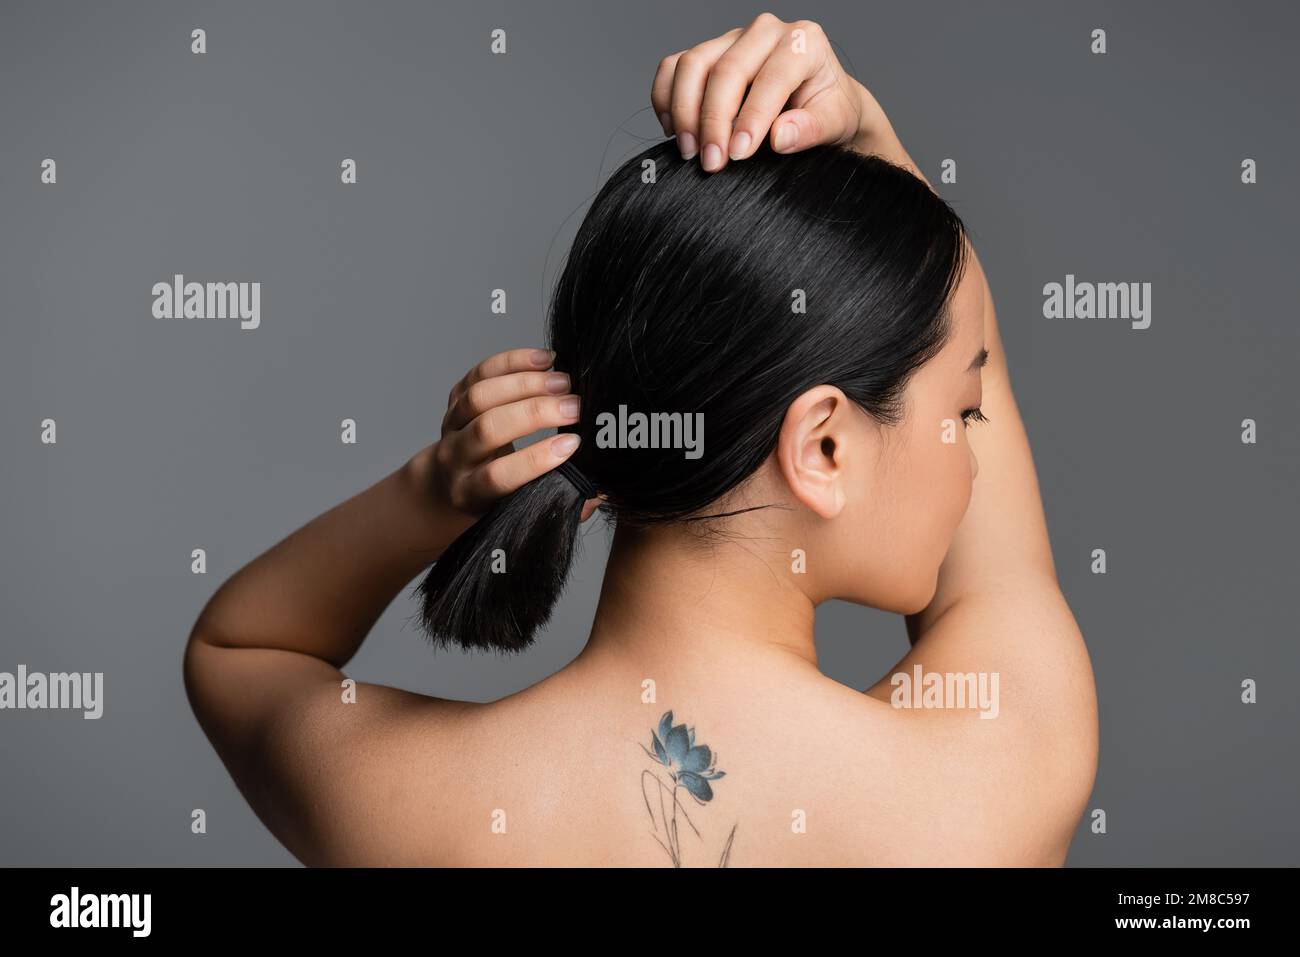 Woman with tattooed shoulders adjusting bra straps stock photo